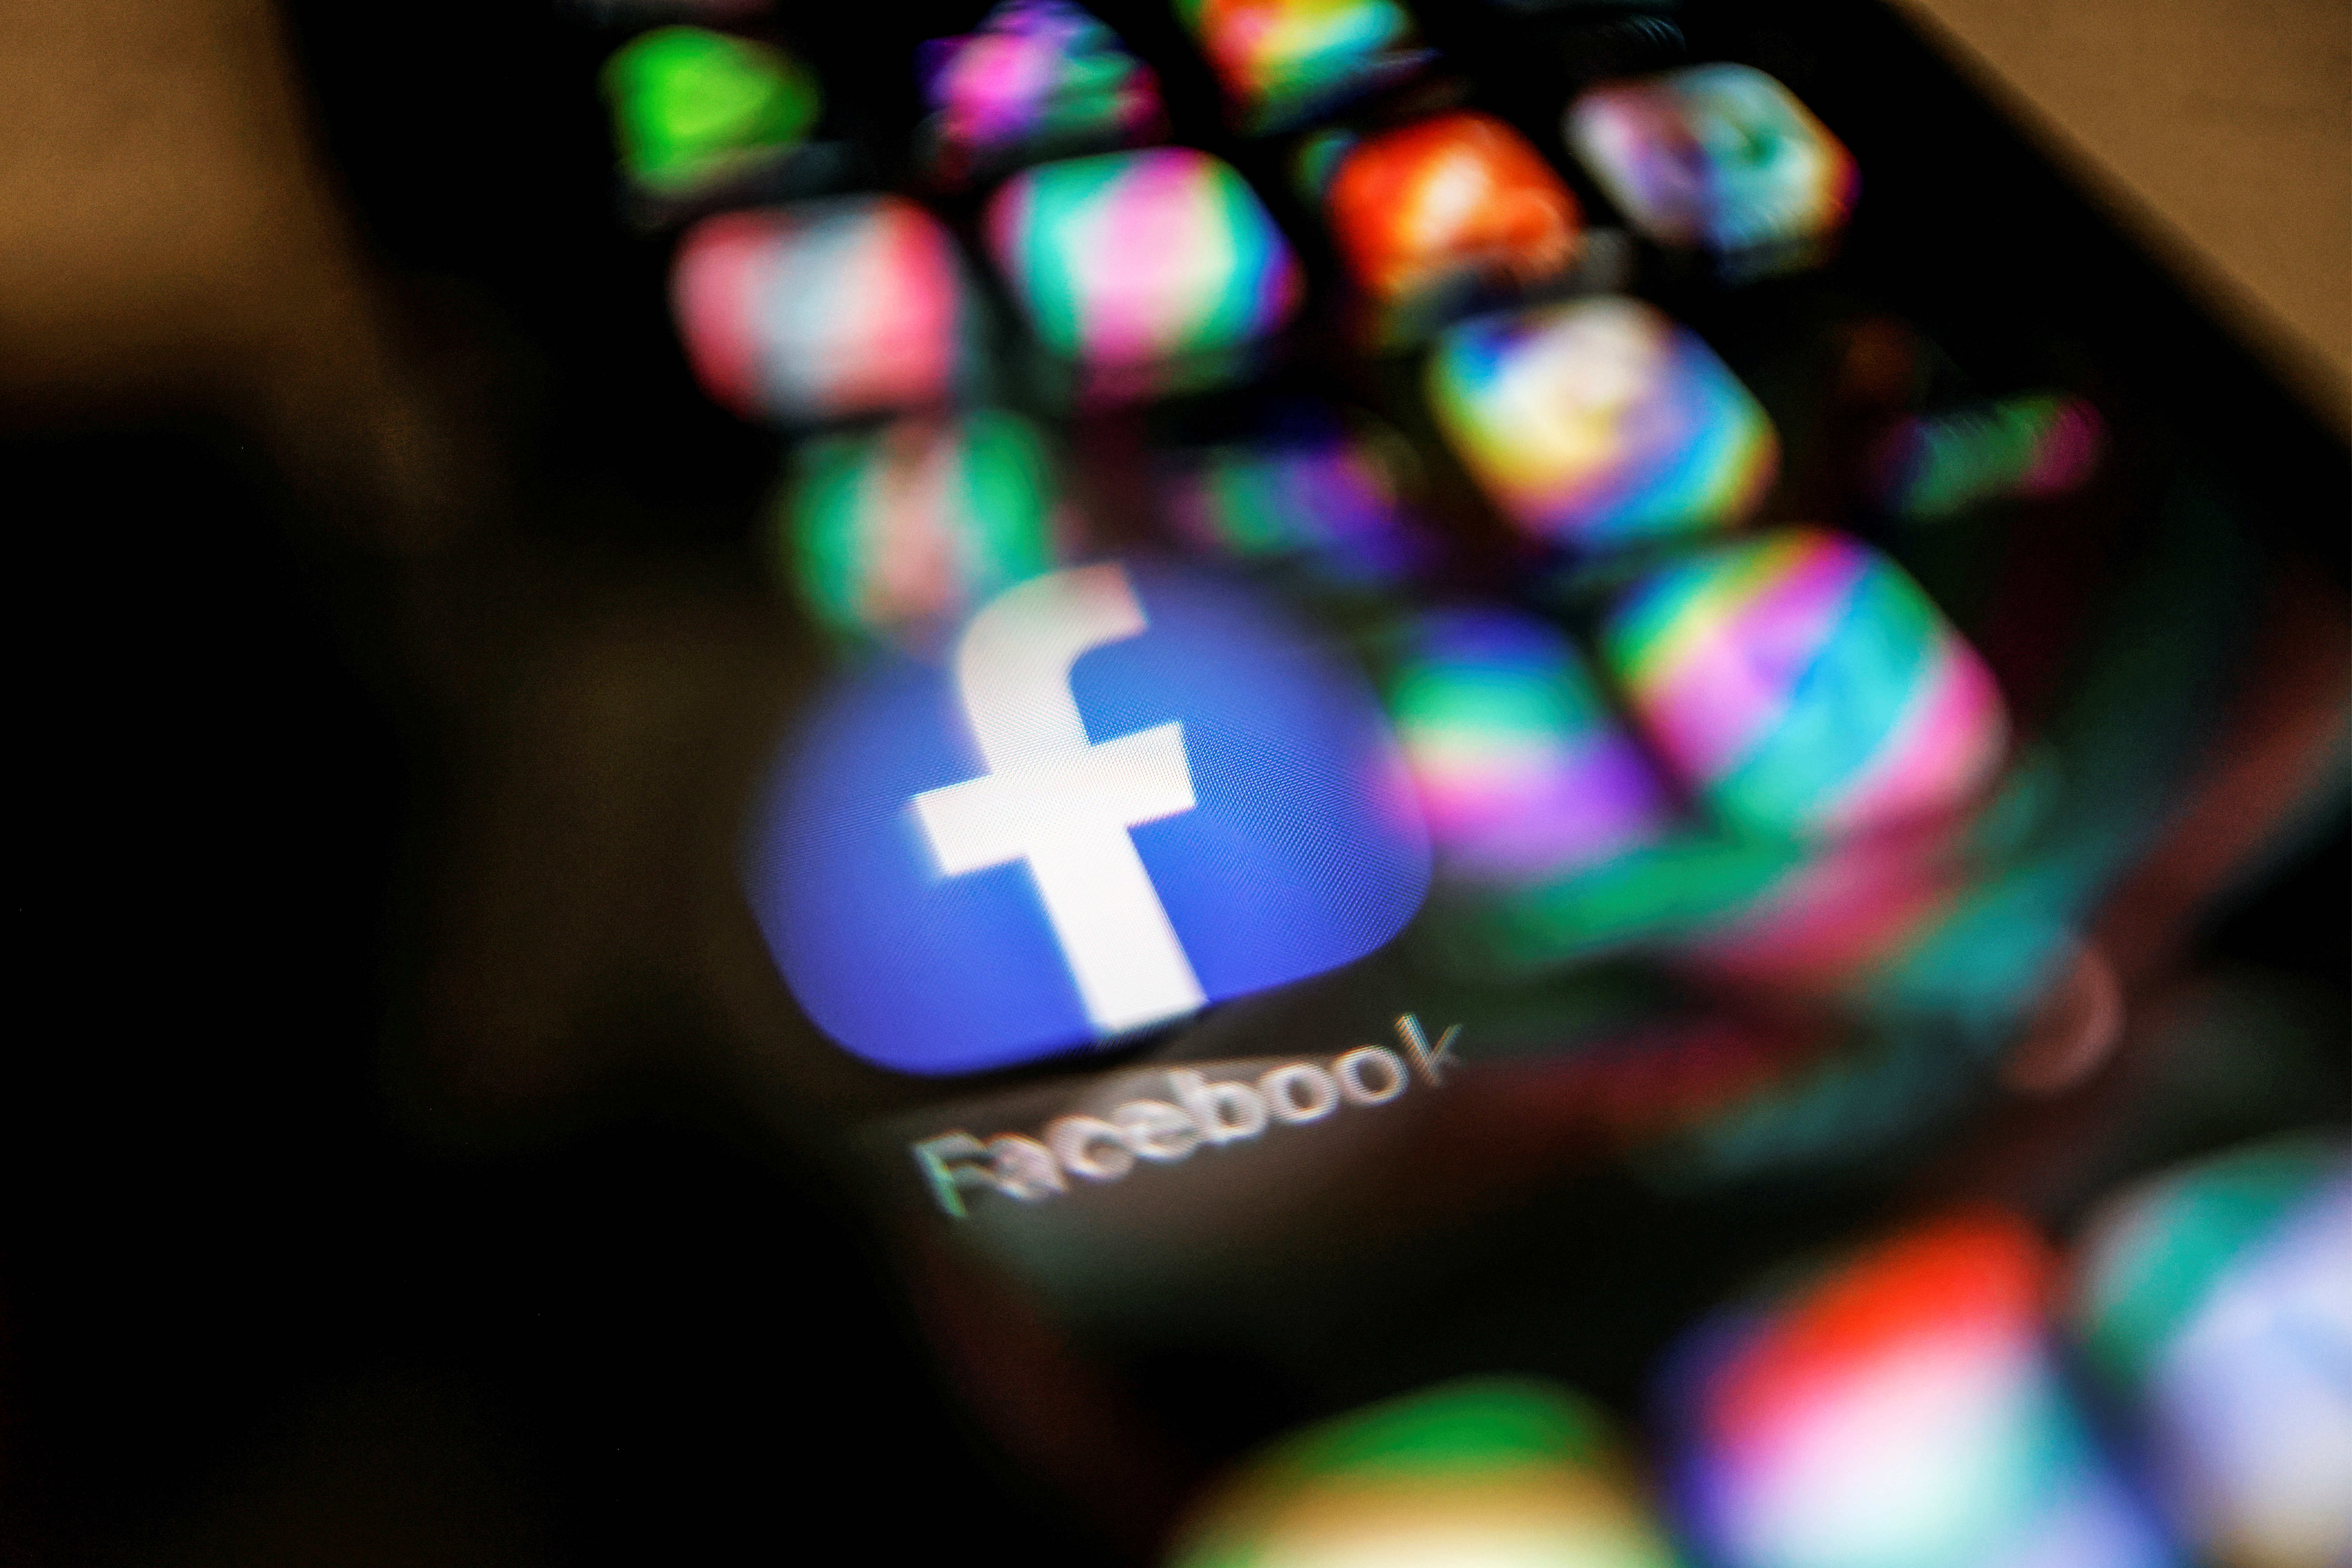 Facebook logo displayed on a mobile phone is seen through a magnifying glass in this picture illustration